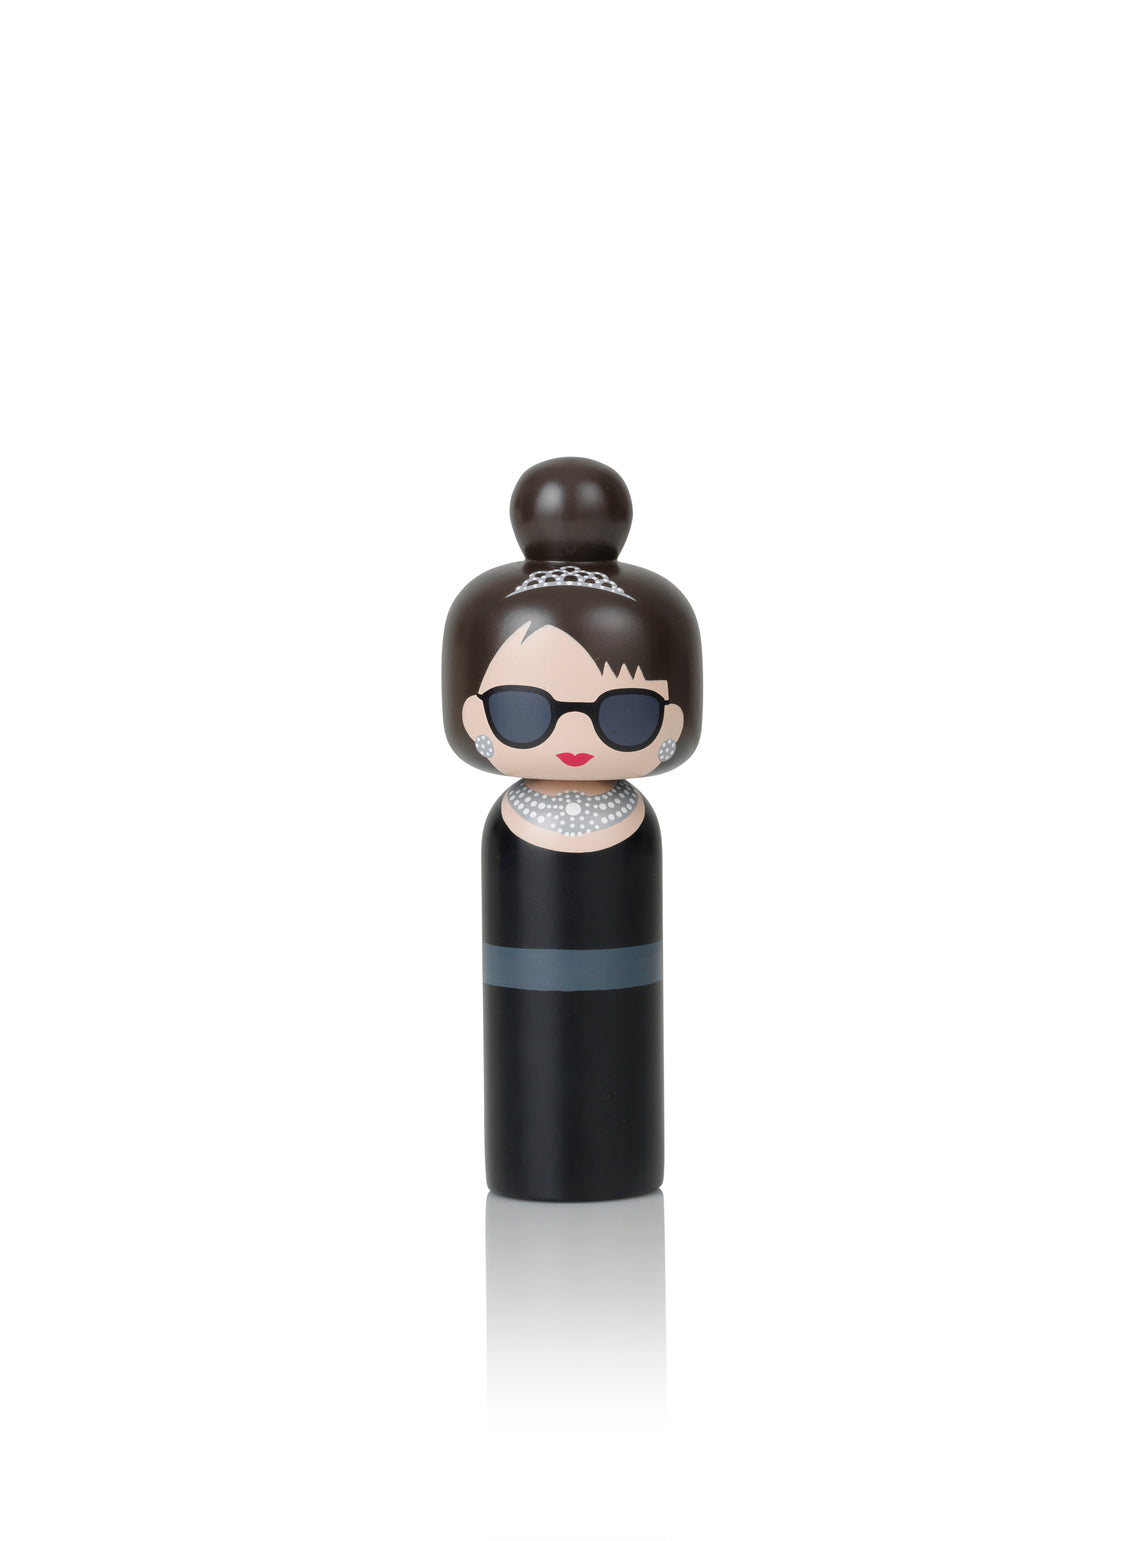 Kokeshi Doll by Sketch.Inc for Lucie Kaas Audrey 16.5cm